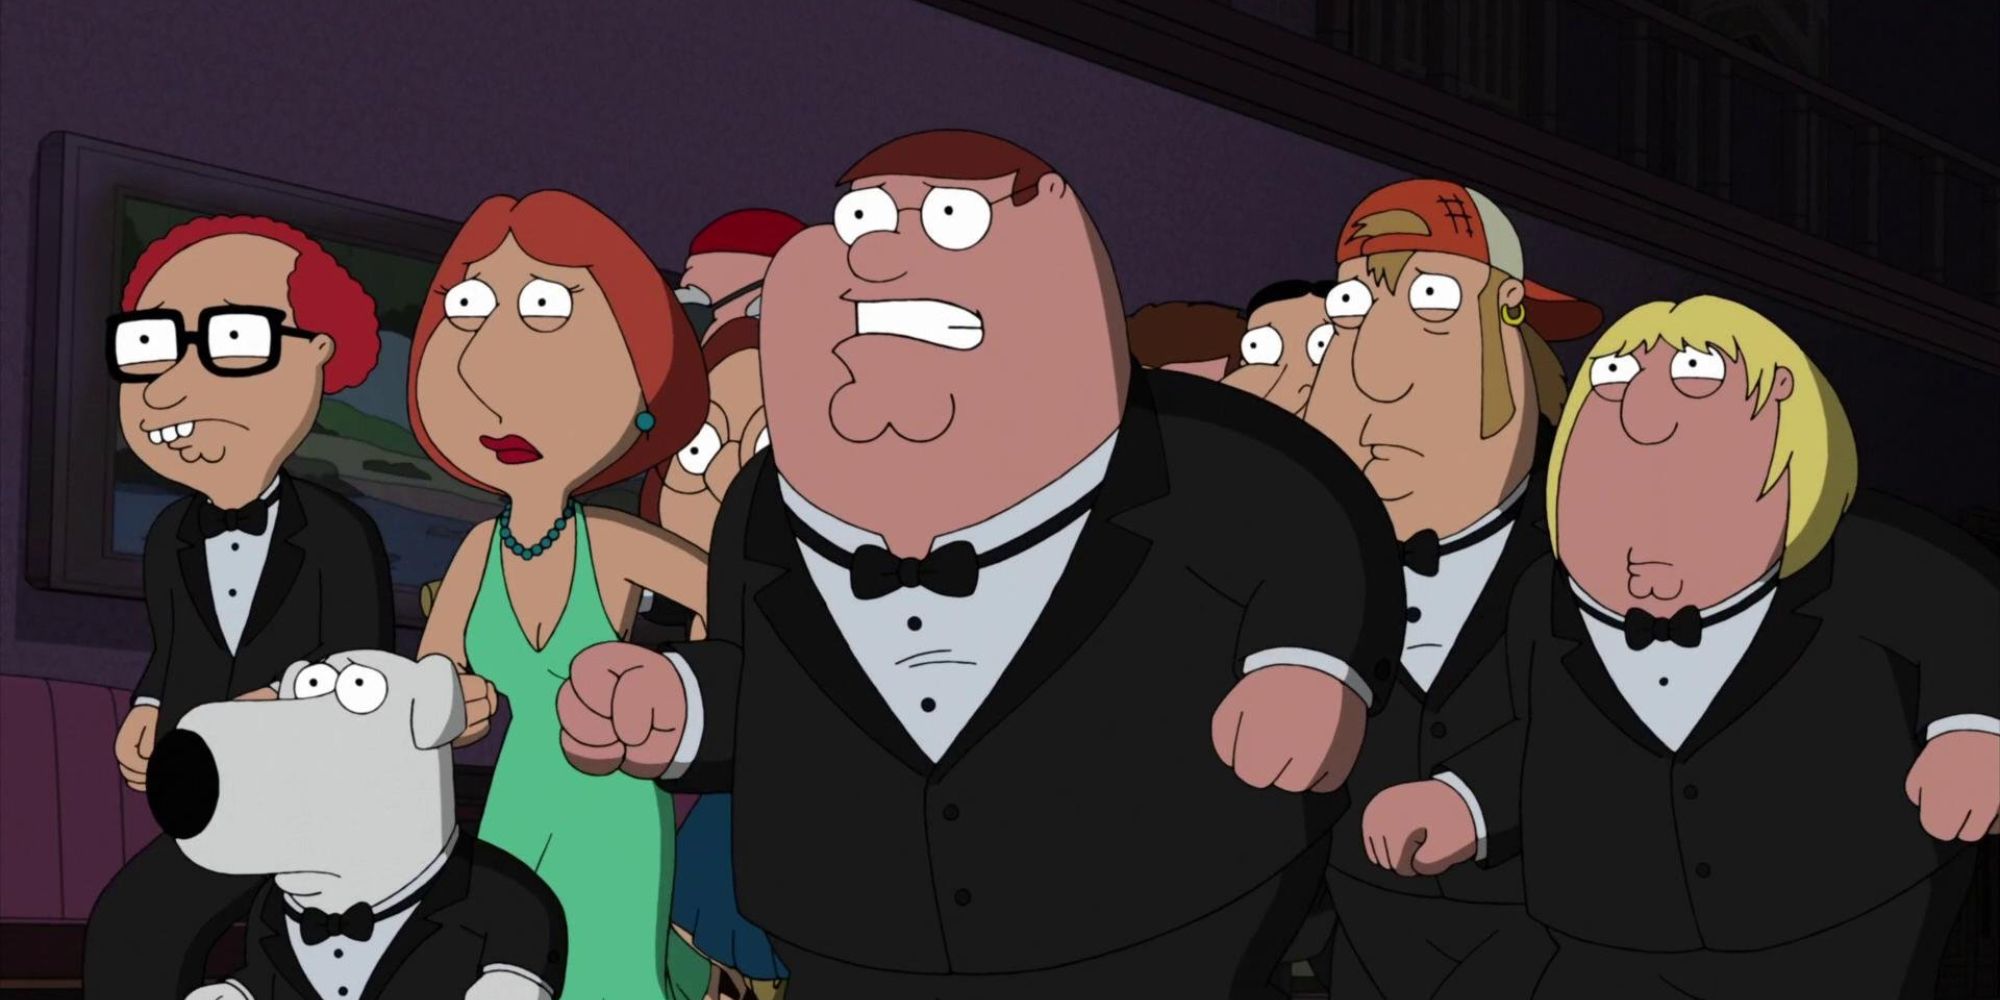 Family Guy characters running in And Then There Were Fewer